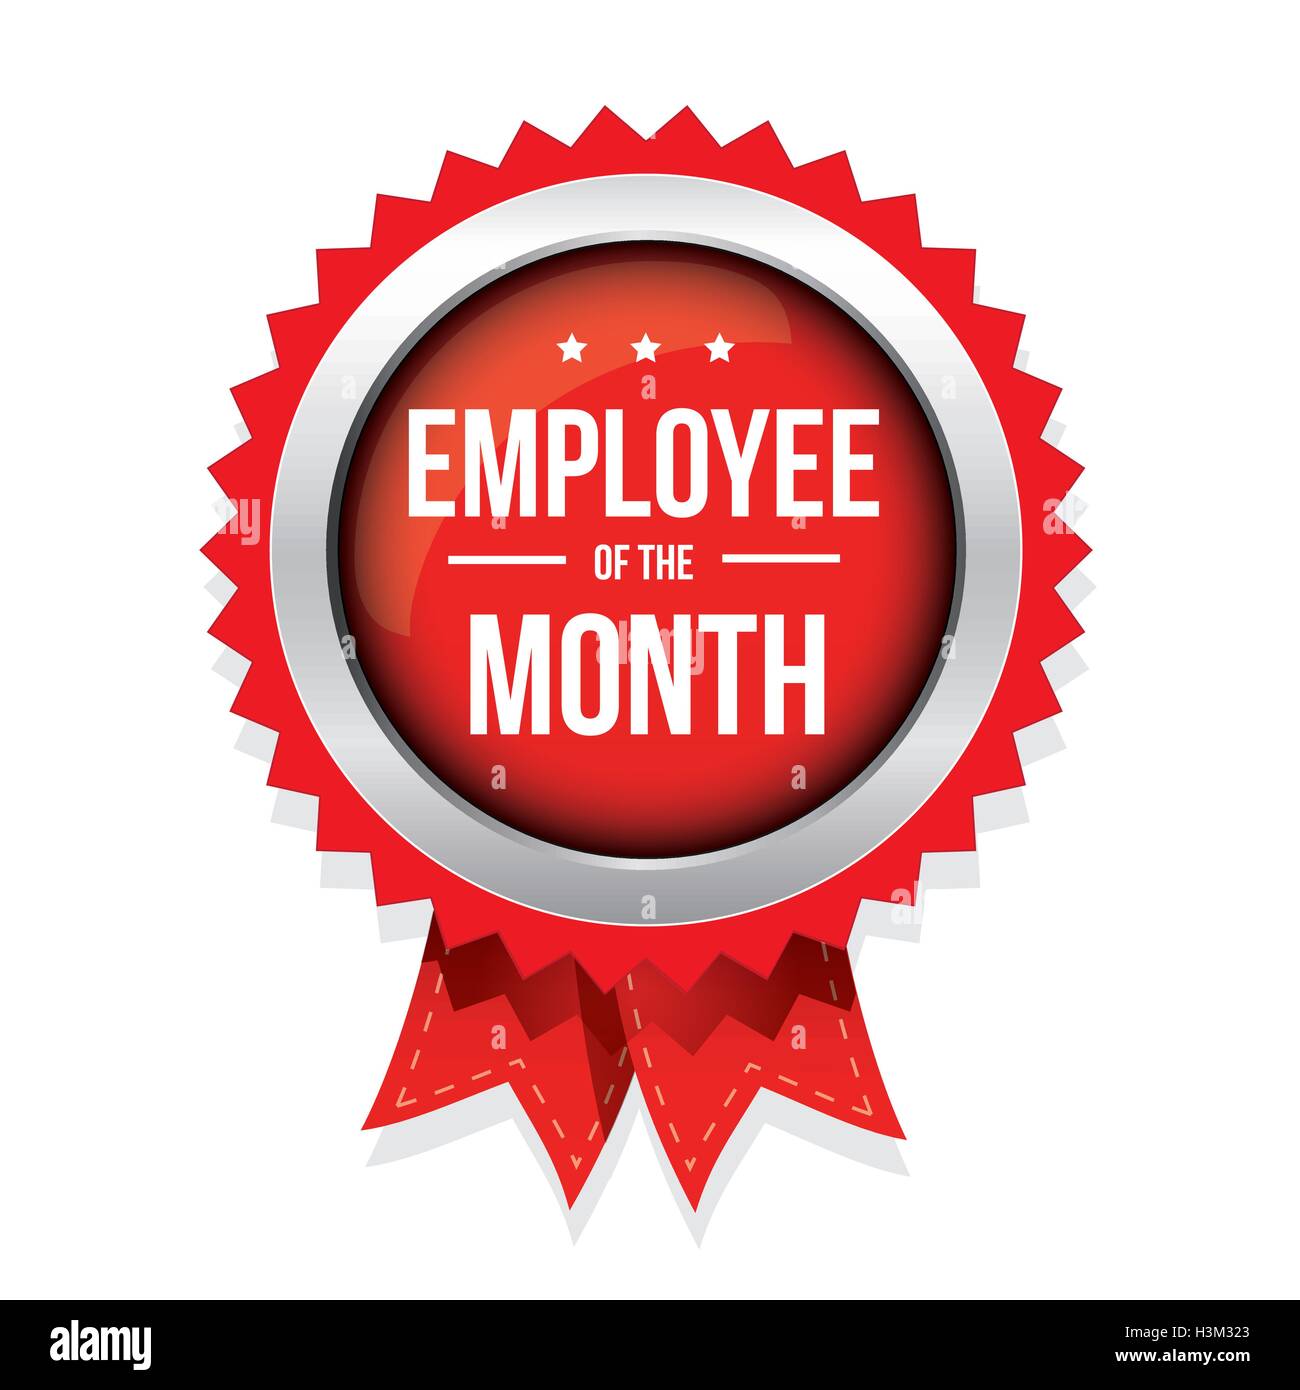 employee of the month clip art - photo #21